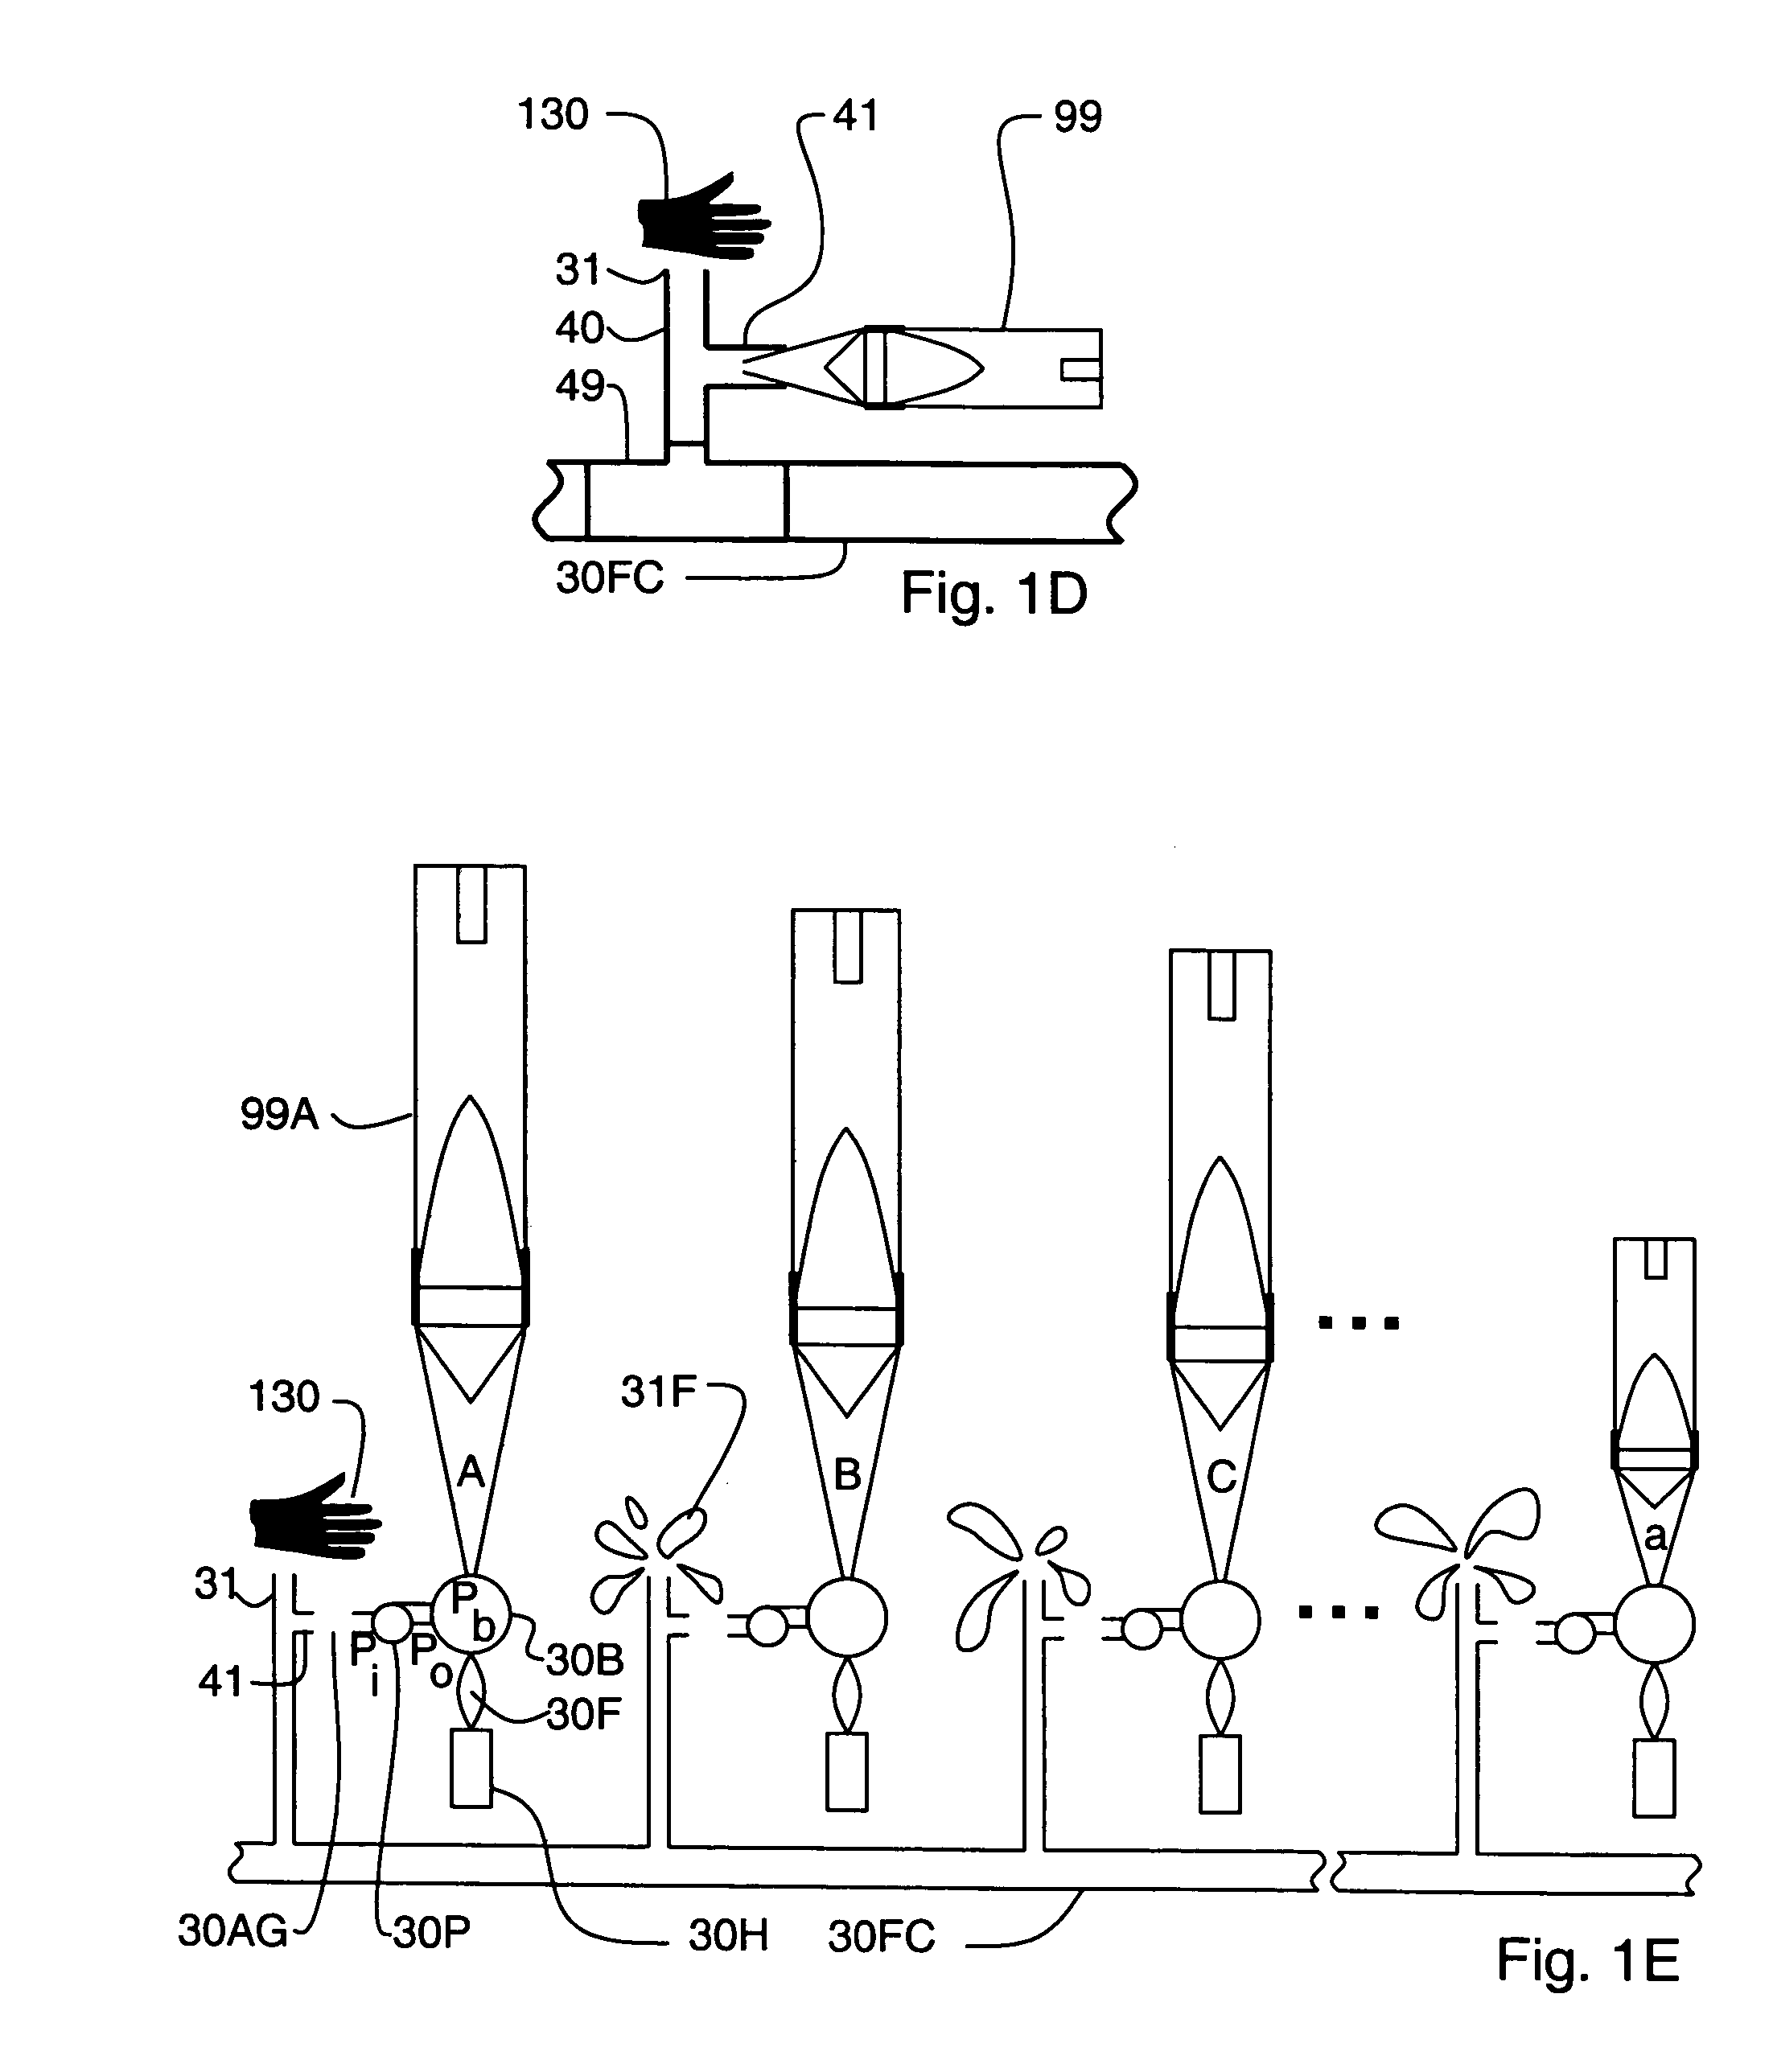 Fluid user interface such as immersive multimediator or input/output device with one or more spray jets